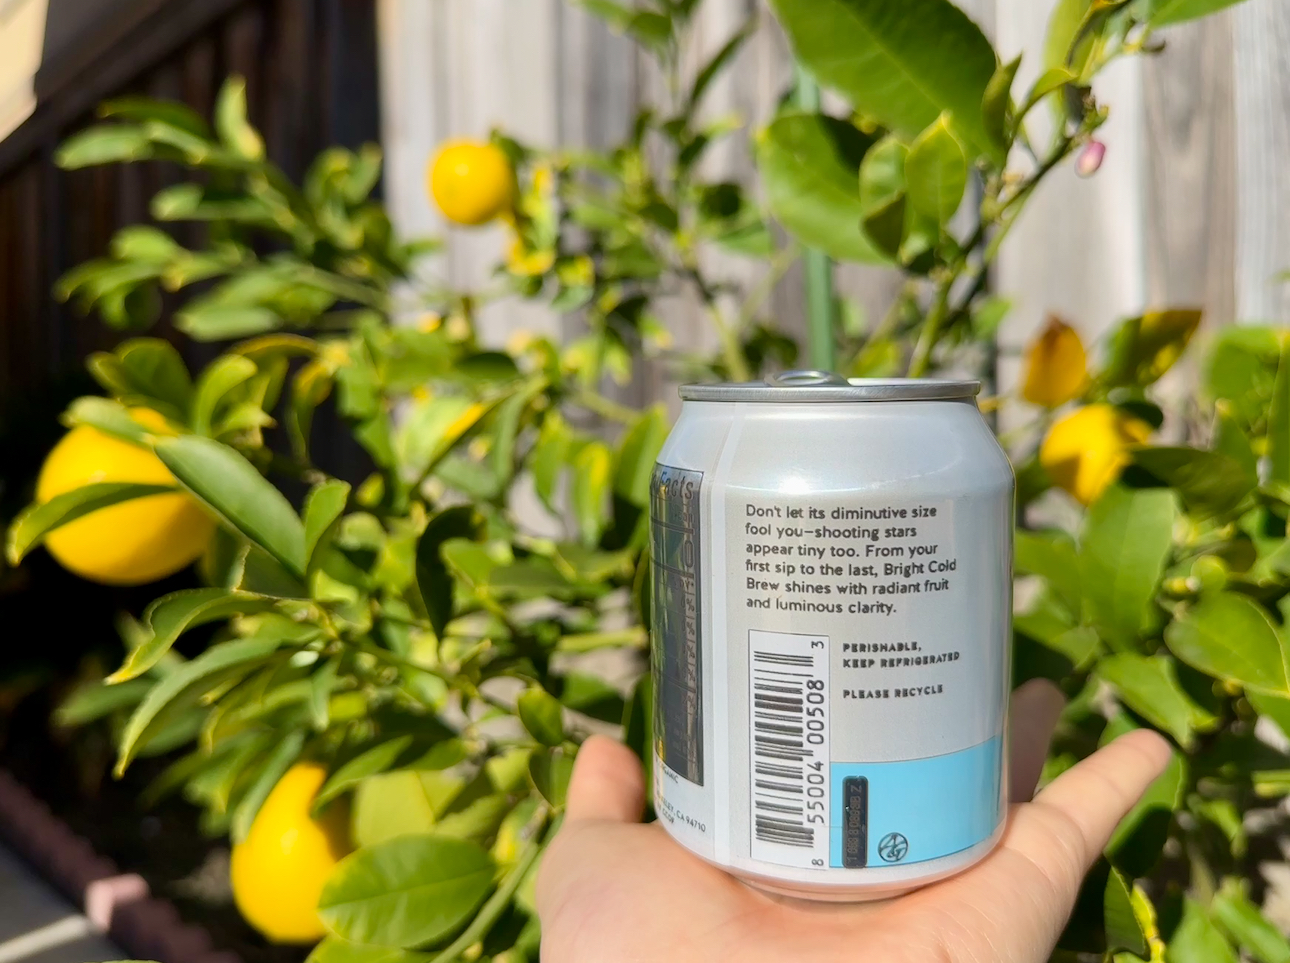 We hold the future of defi in the palm of our hands. Don’t let its diminutive size fool you — shooting stars appear tiny too. From your first trade to the last, defi shines with radiant fruit and luminous clarity. PERISHABLE, KEEP DECENTRALIZED. Nutrition Facts: 0 calories. Source: Blue Bottle Coffee.